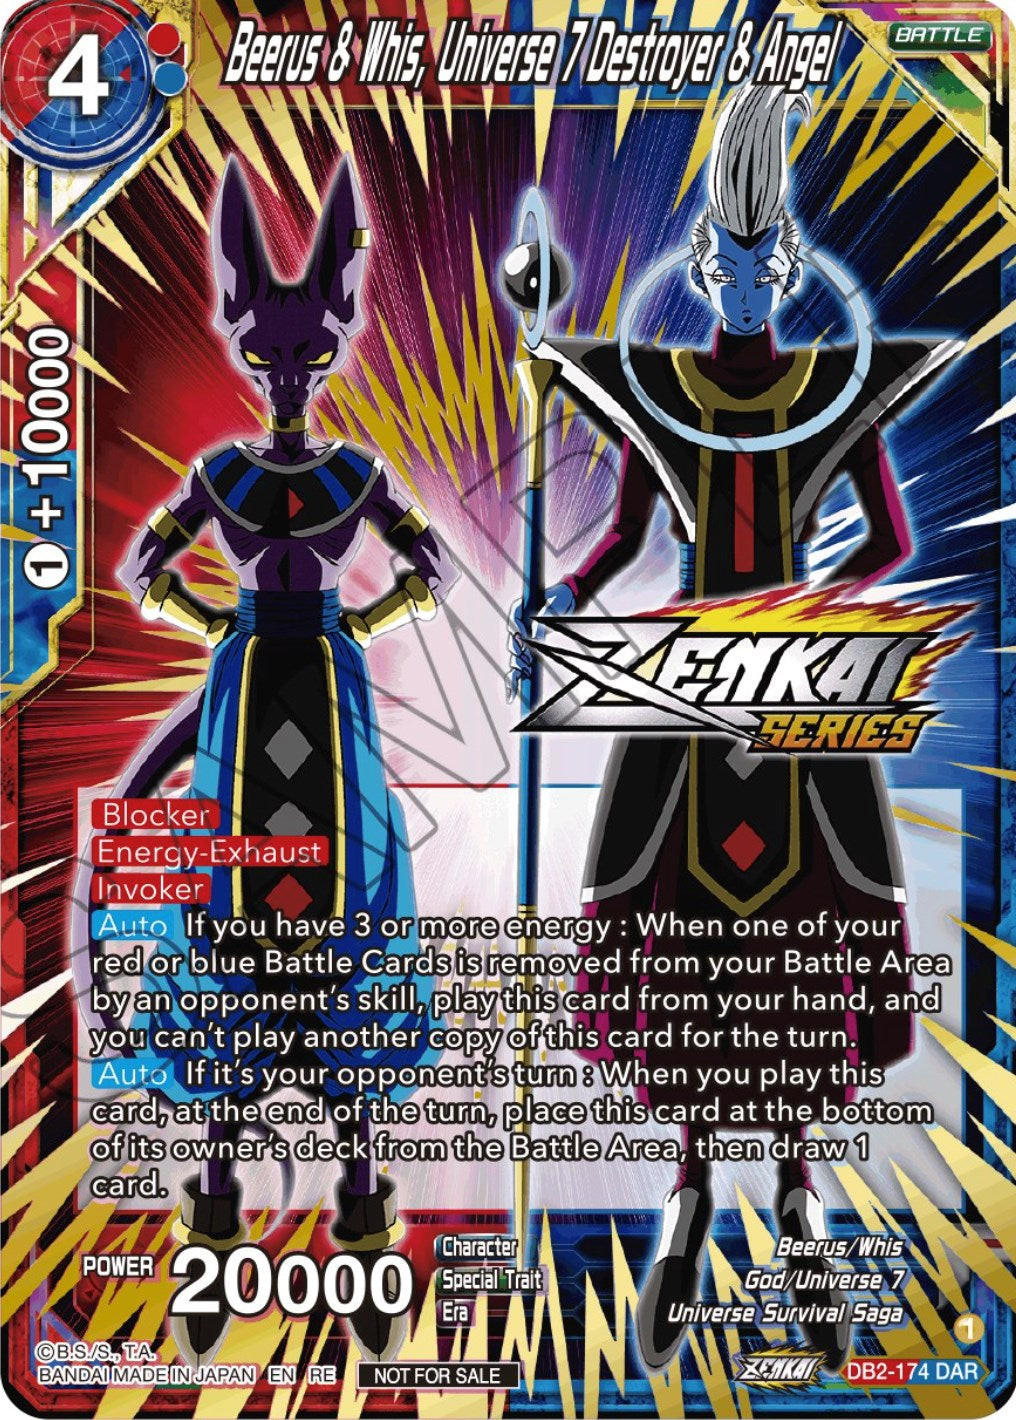 Beerus & Whis, Universe 7 Destroyer & Angel (Event Pack 12) (DB2-174) [Tournament Promotion Cards] | Event Horizon Hobbies CA